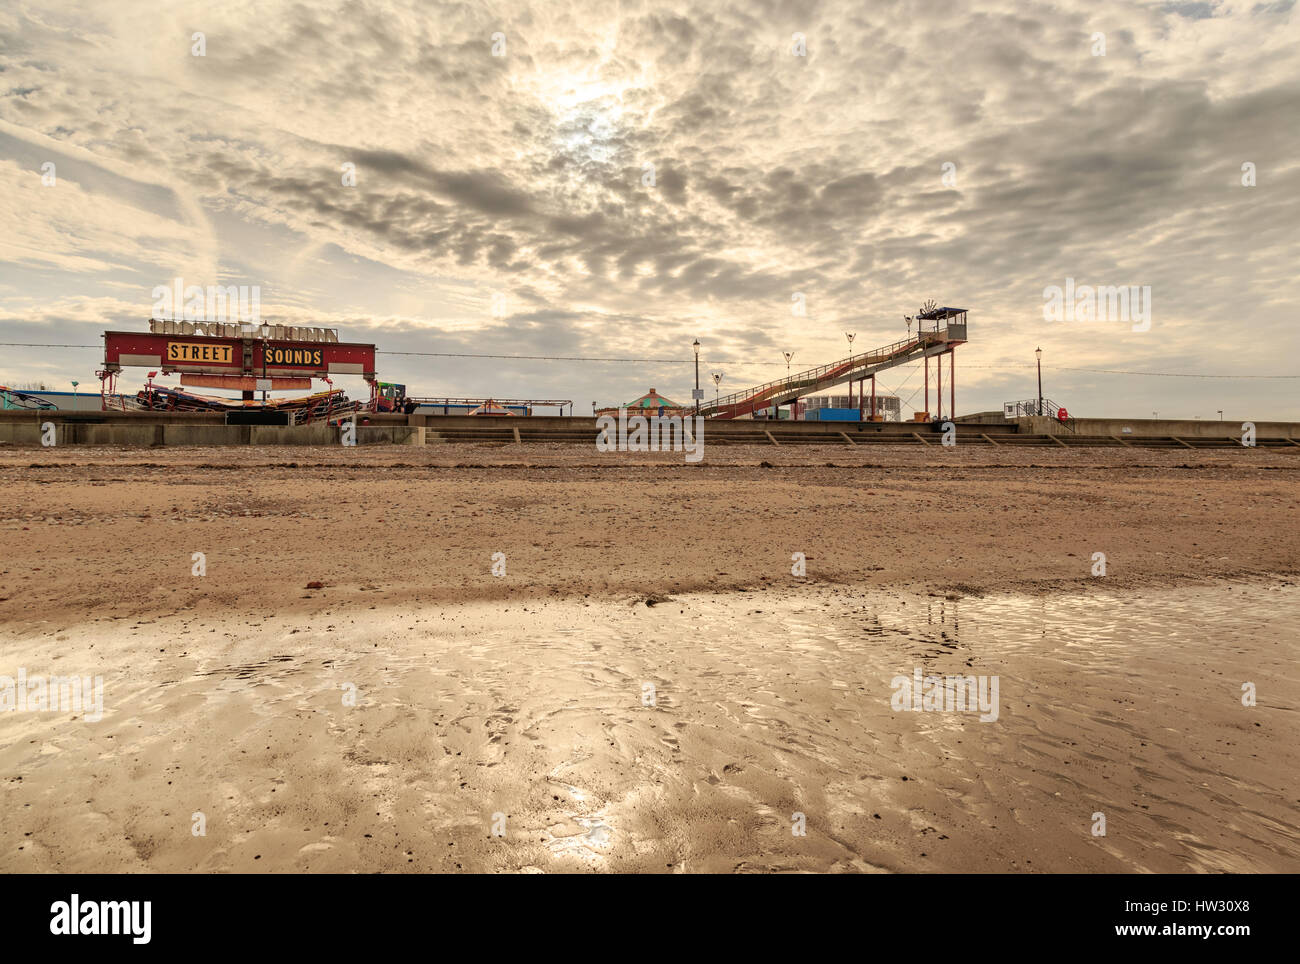 HUNSTANTON, ENGLAND - MARCH 10: Hunstanton fairground from the beach as sunset approaches. HDR image. In Hunstanton, Norfolk, England. On 10th March 2 Stock Photo